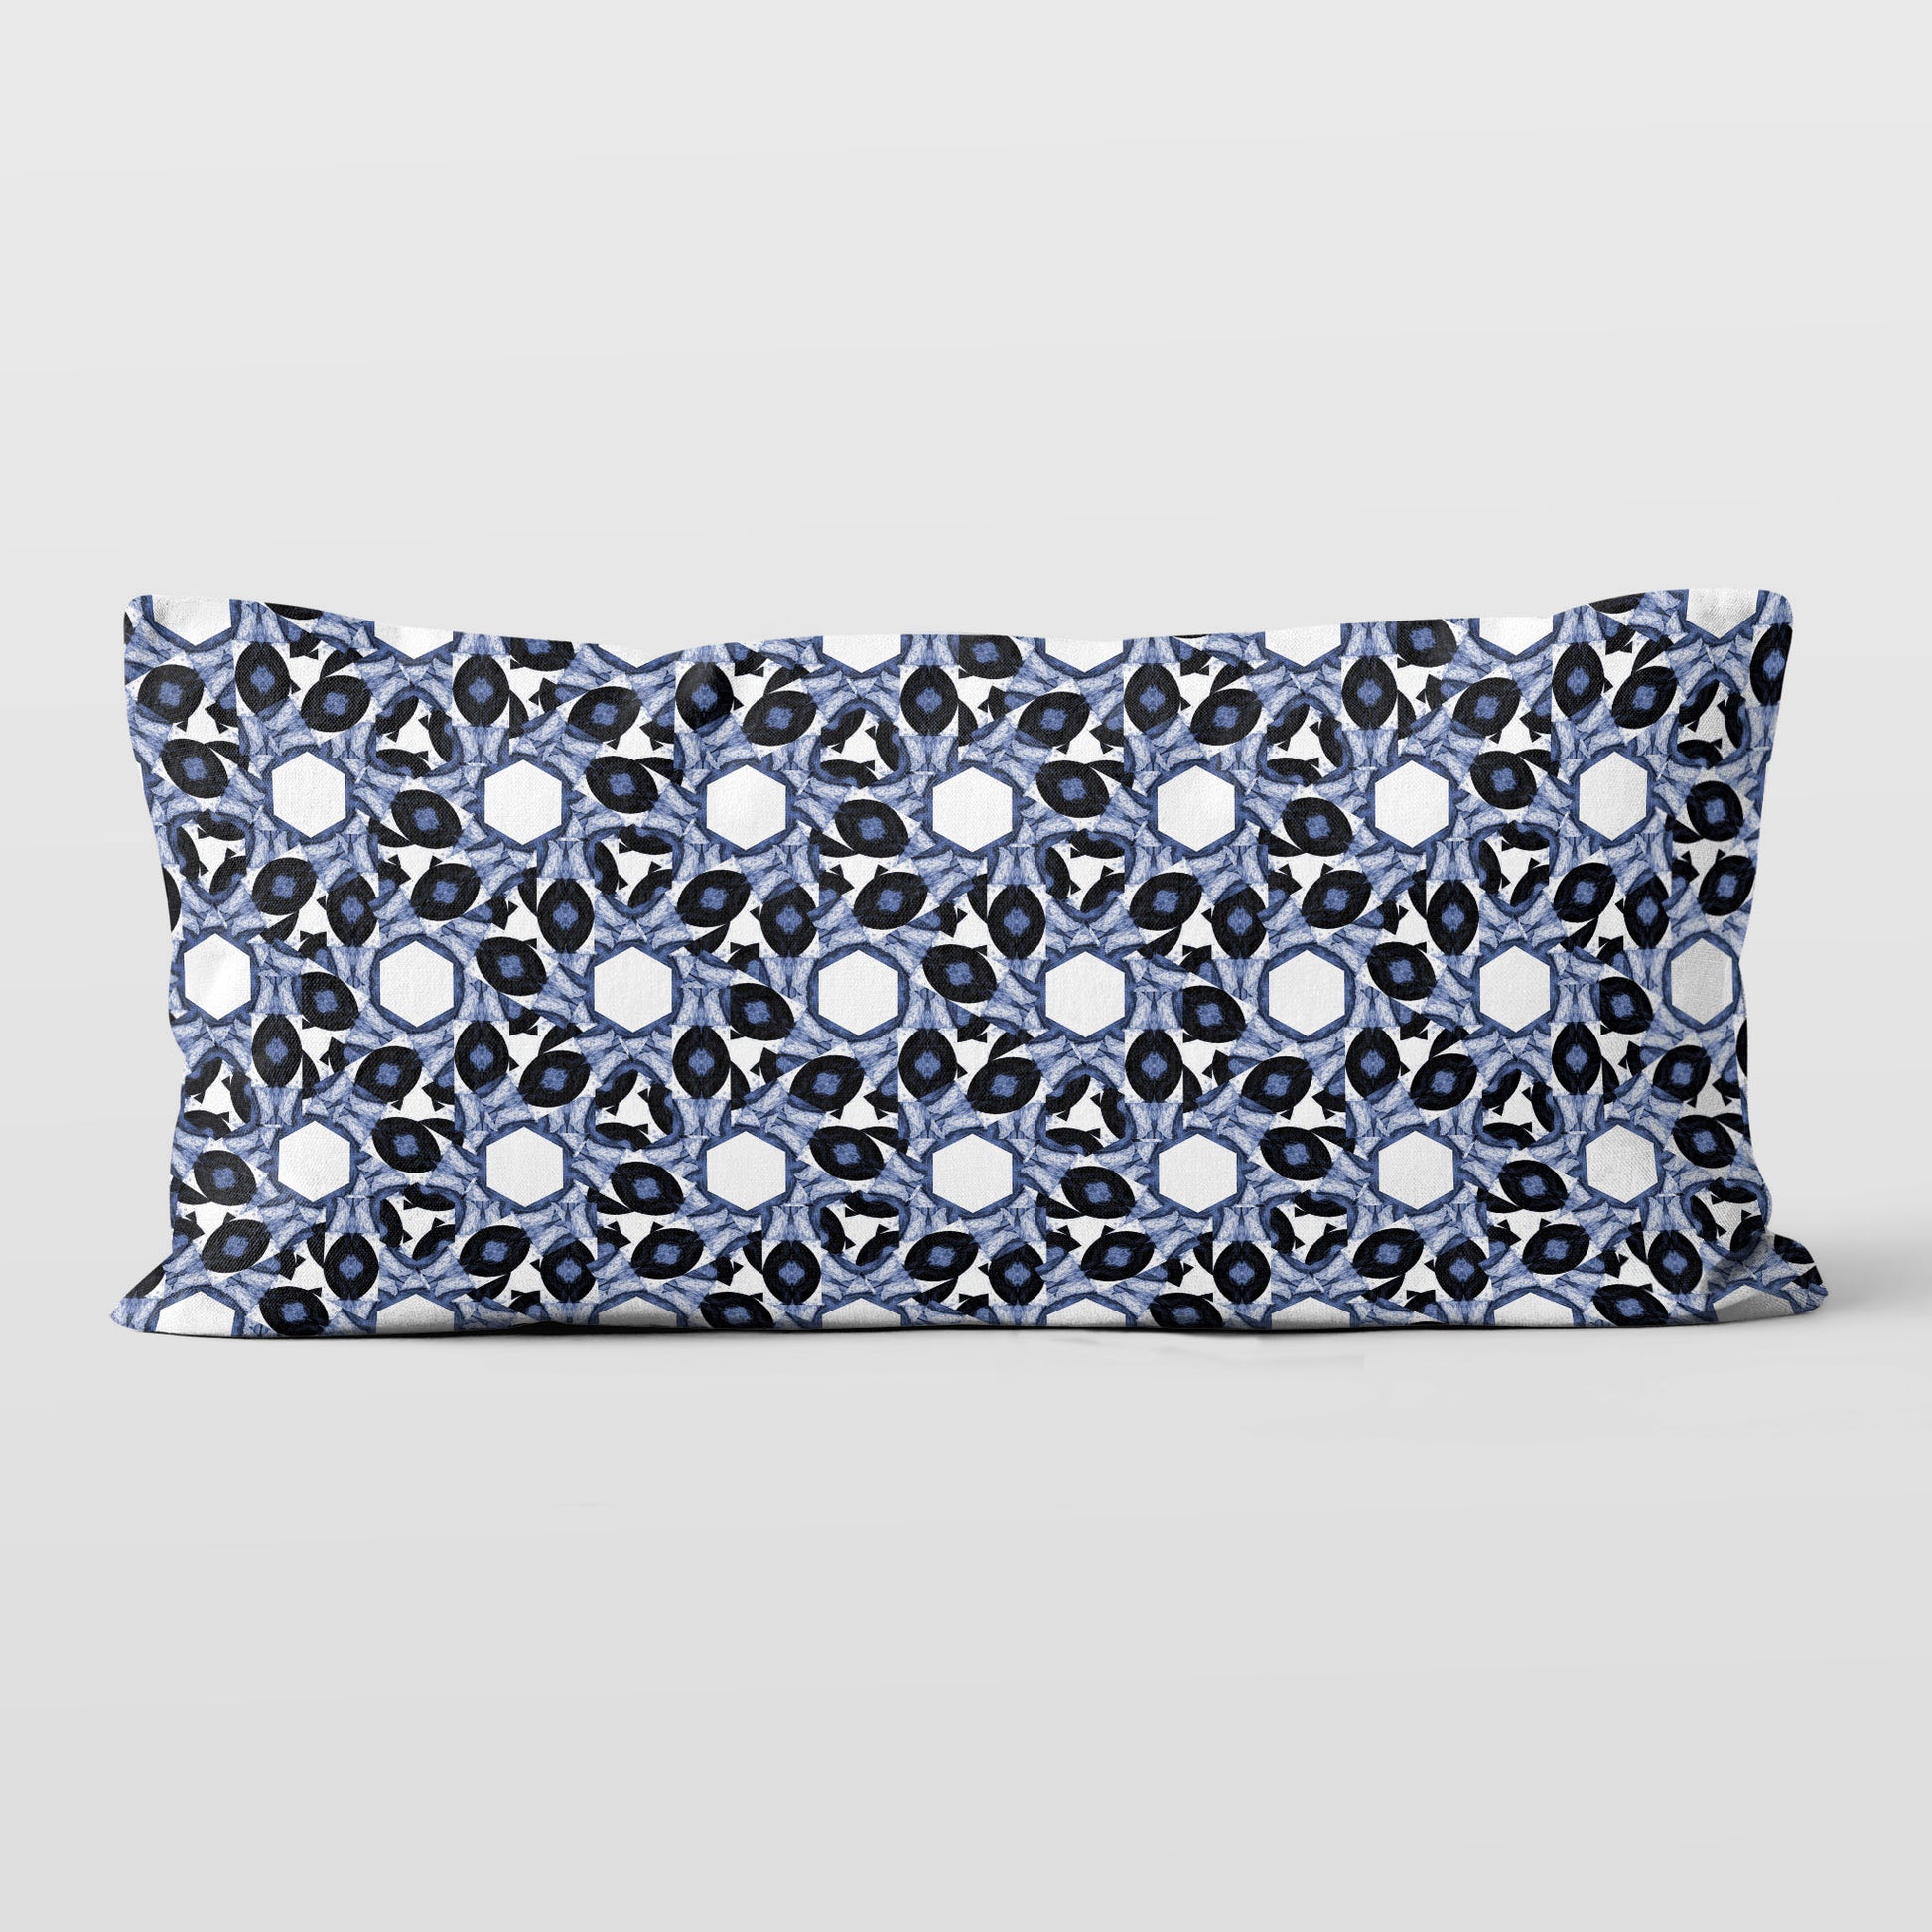 Rectangular lumbar pillow featuring abstract geometric pattern in blue and white.